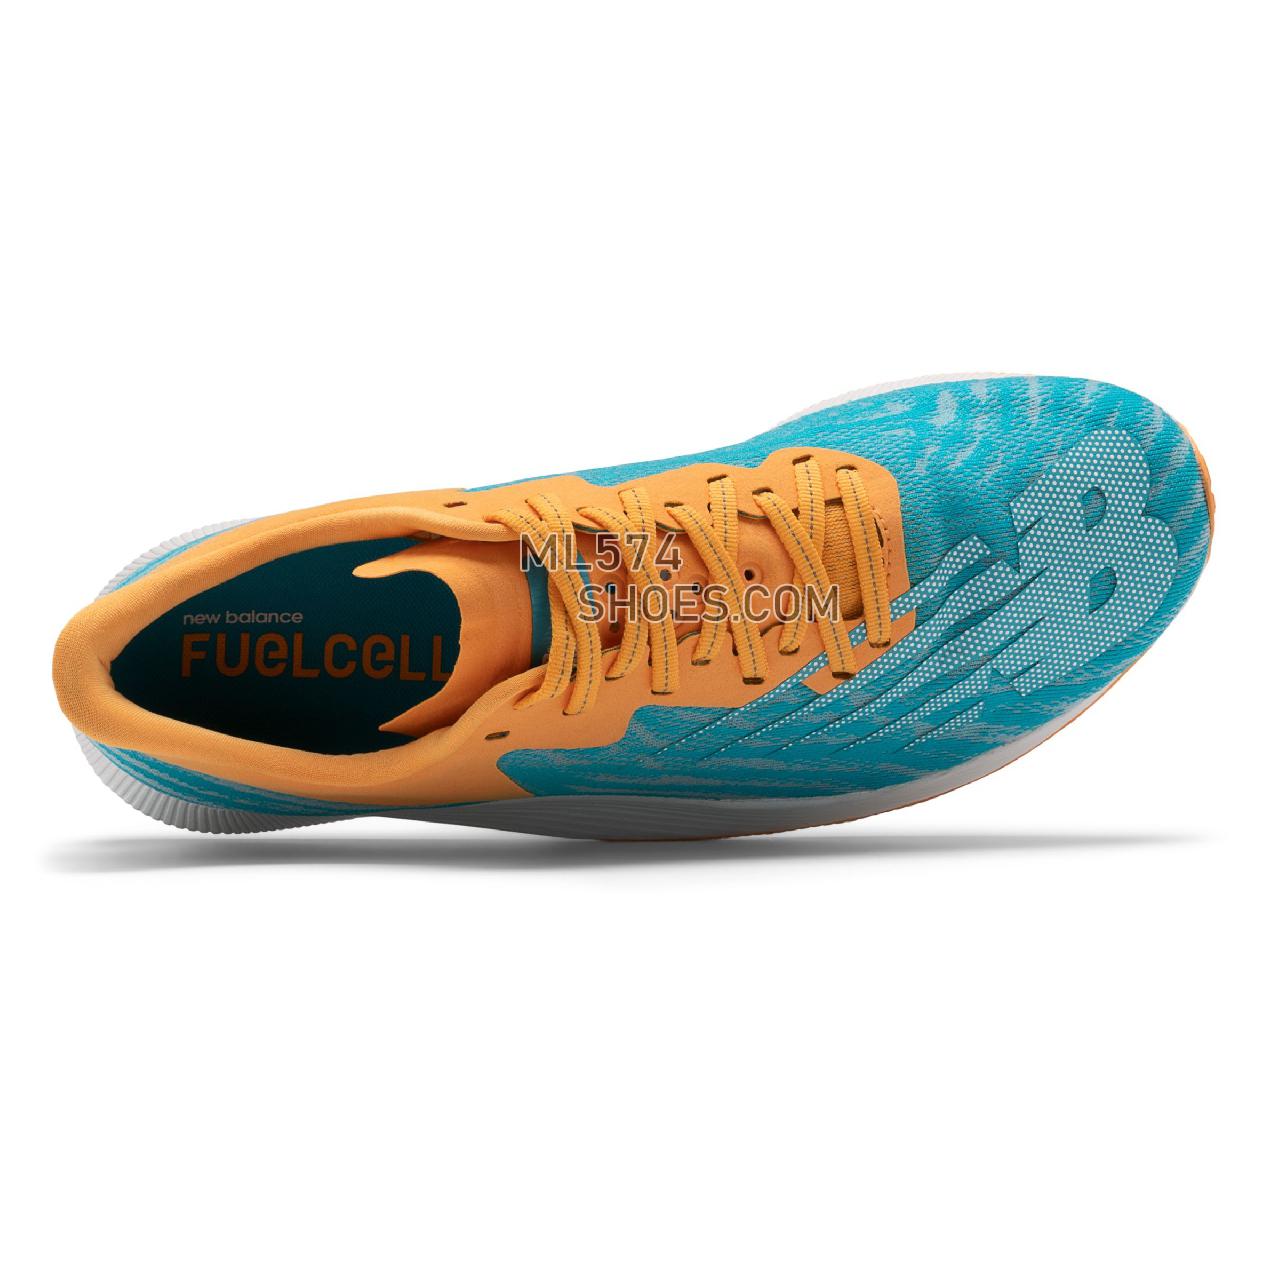 New Balance FuelCell TC - Men's Fuelcell Sleek And LightWeight - Virtual Sky with Habanero and Nb White - MRCXVH1